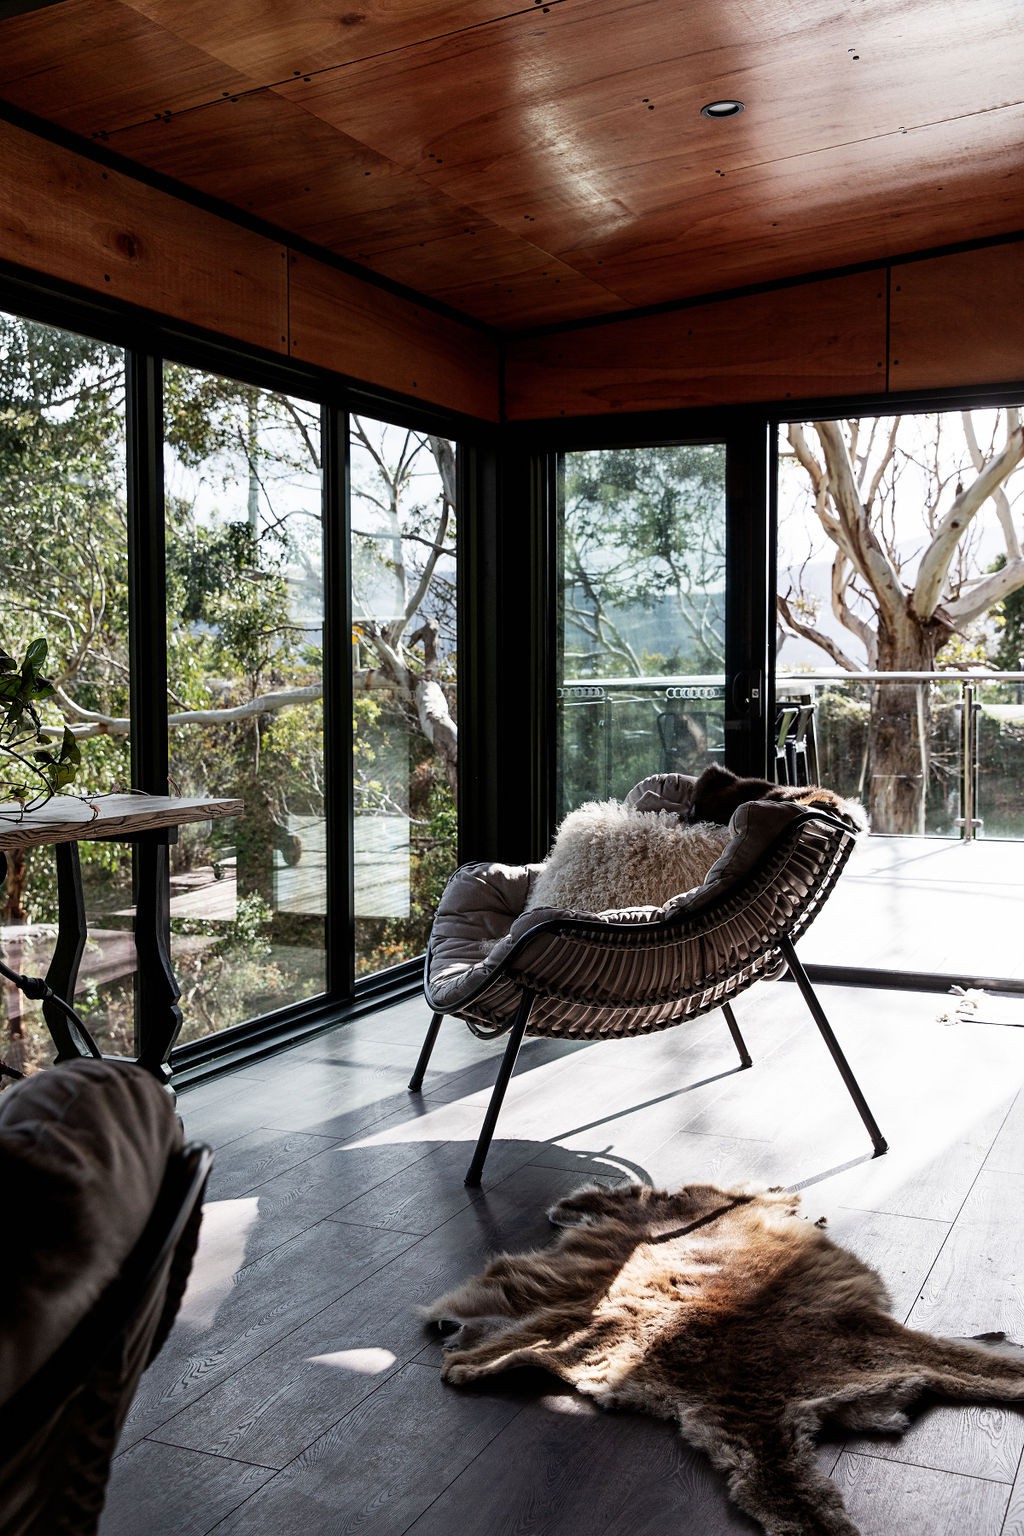 A Tranquil Beach Retreat Set Amidst the Treetops